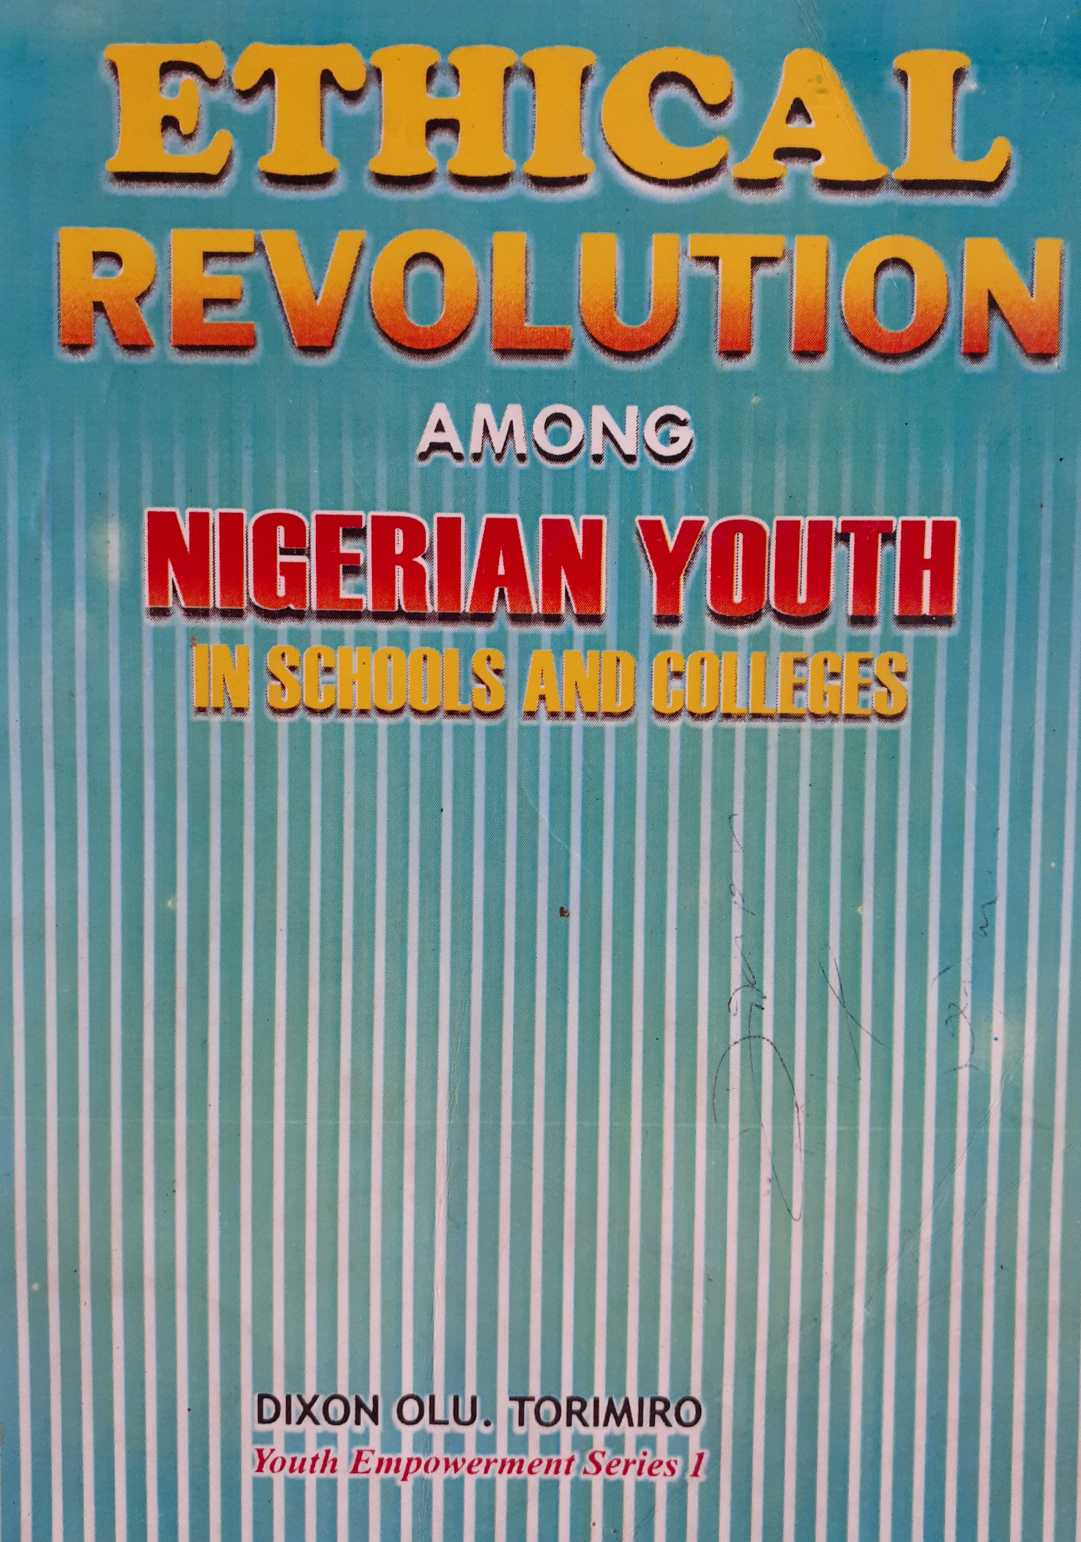 Ethical revolution among Nigerian youth in schools and colleges